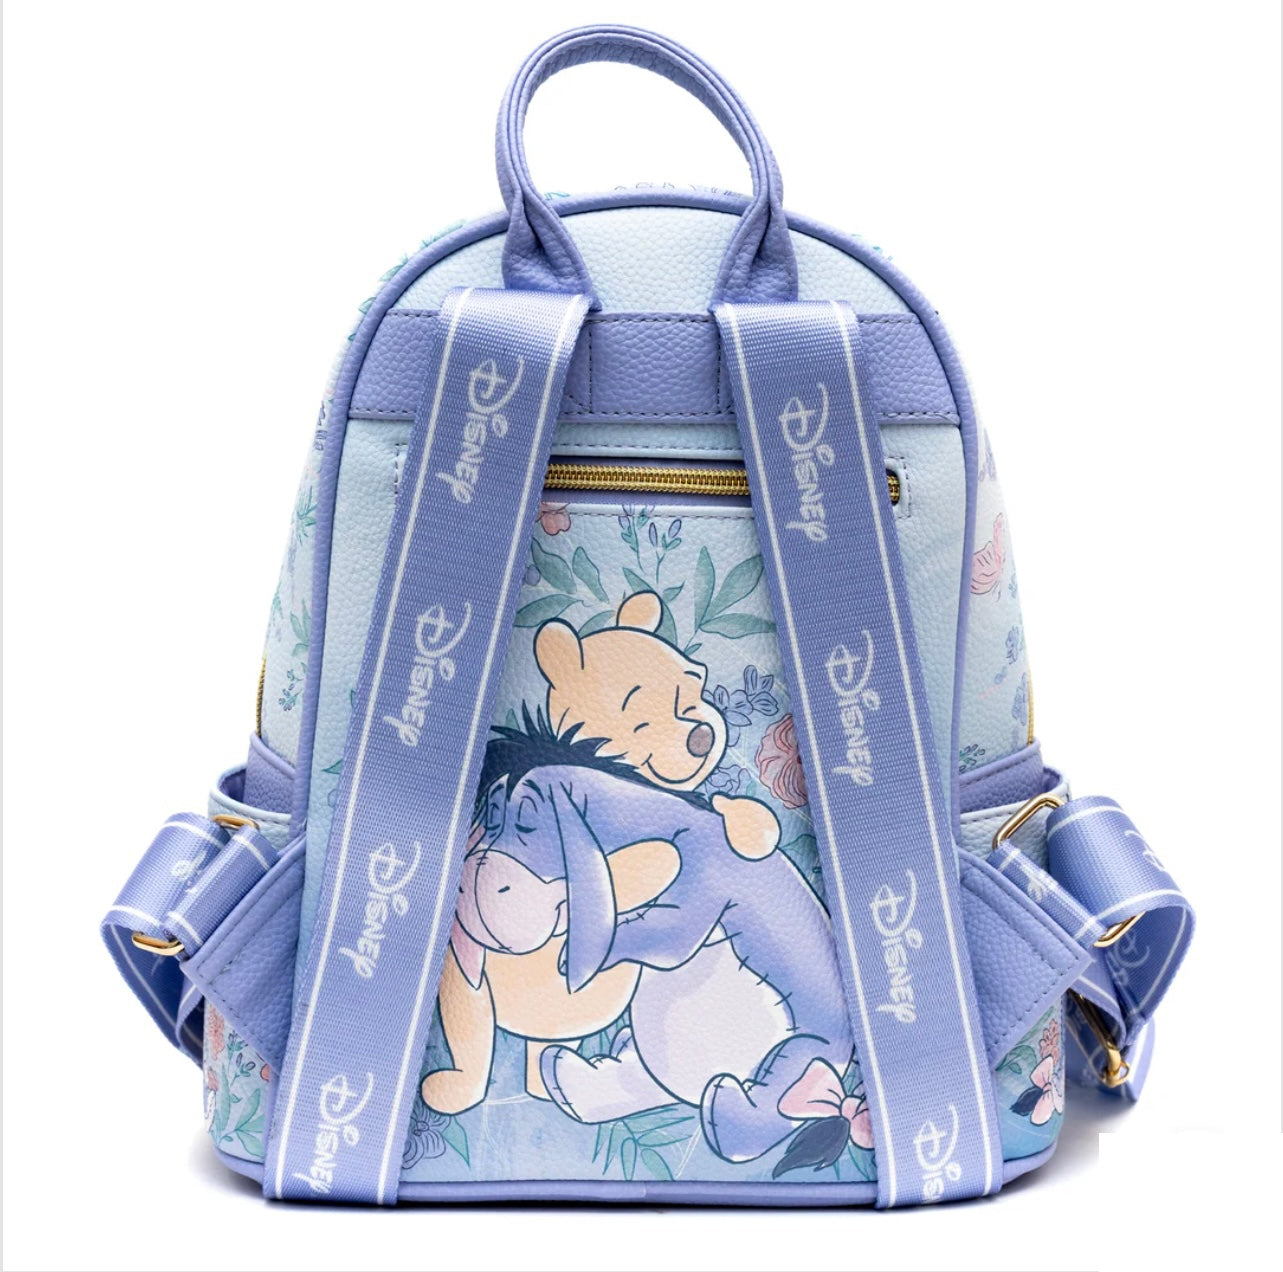 Exclusive Limited Edition Winnie the Pooh- Eeyore Vegan Leather Backpack